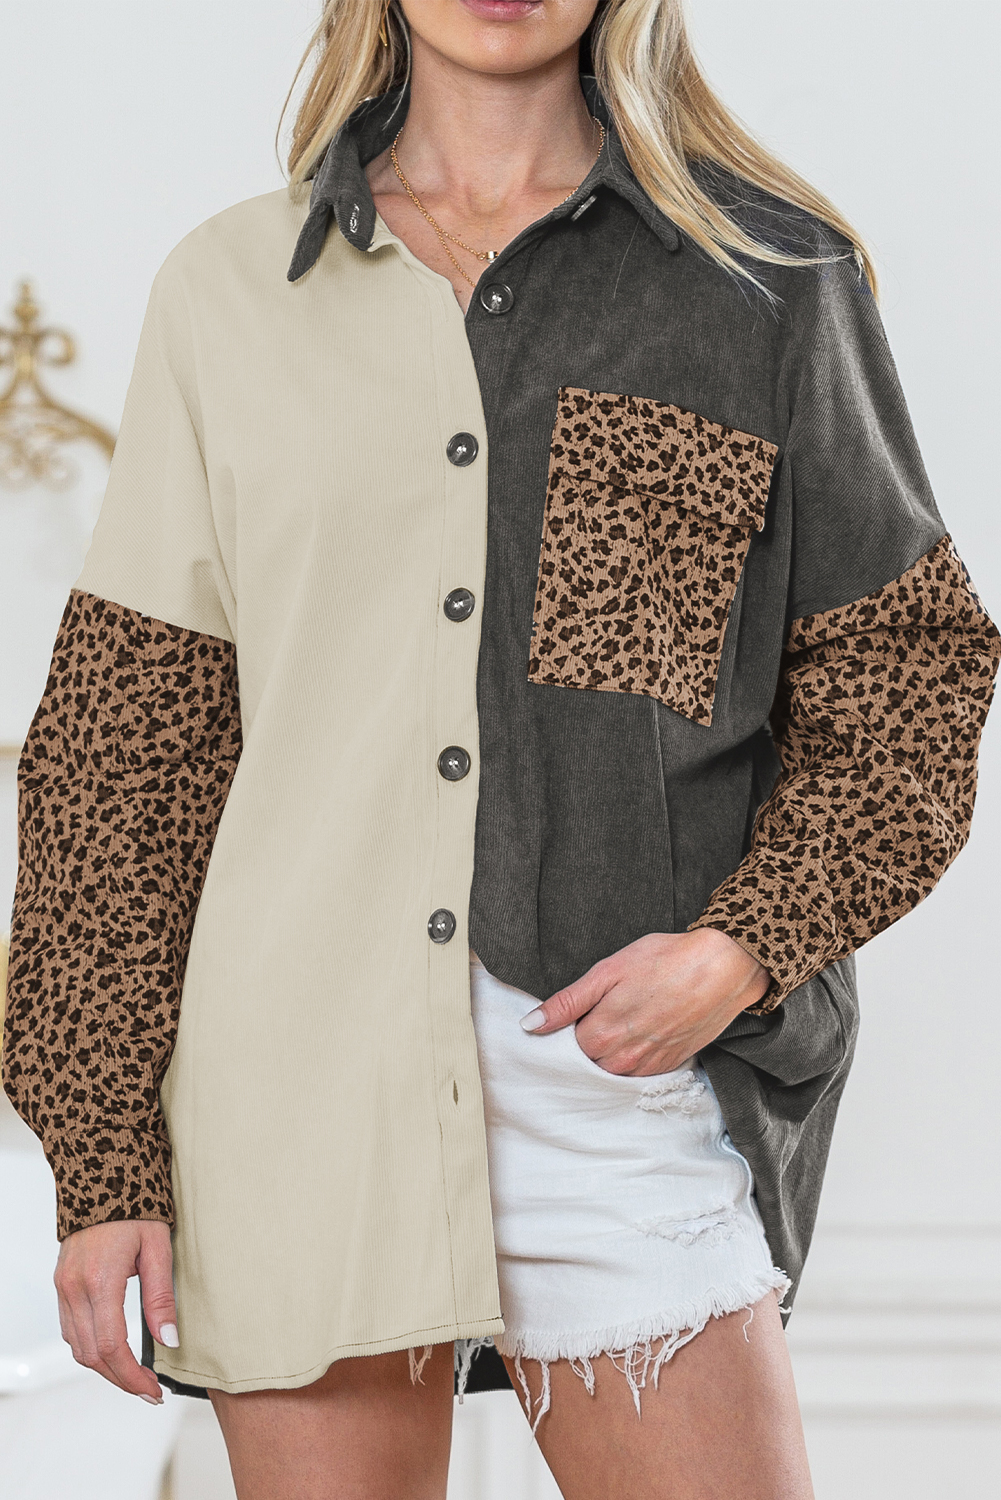 Shewin Wholesale Apparel Suppliers Gray Color Block Leopard Patchwork Casual Corduroy Shacket